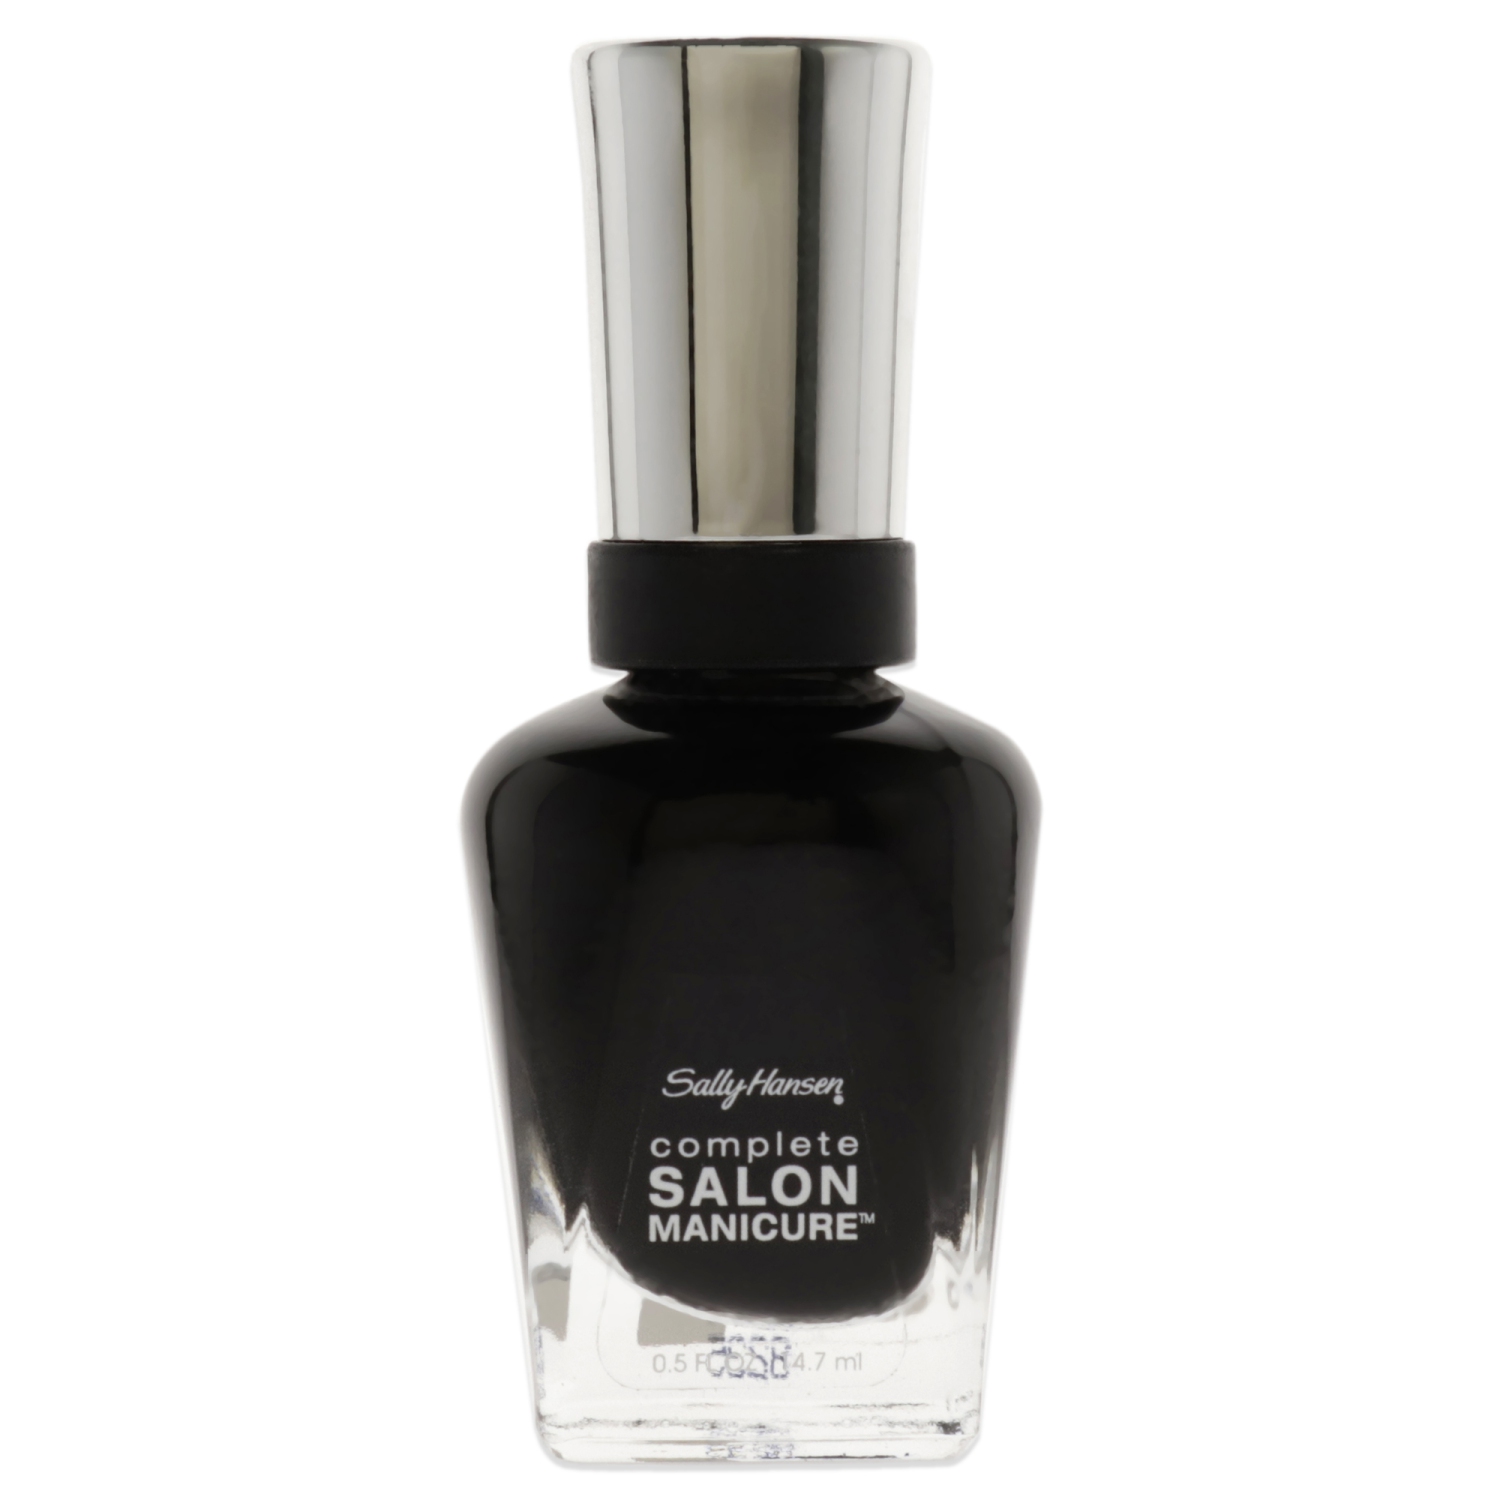 Complete Salon Manicure - 403 Hooked On Onyx by Sally Hansen for Women - 0.5 oz Nail Polish